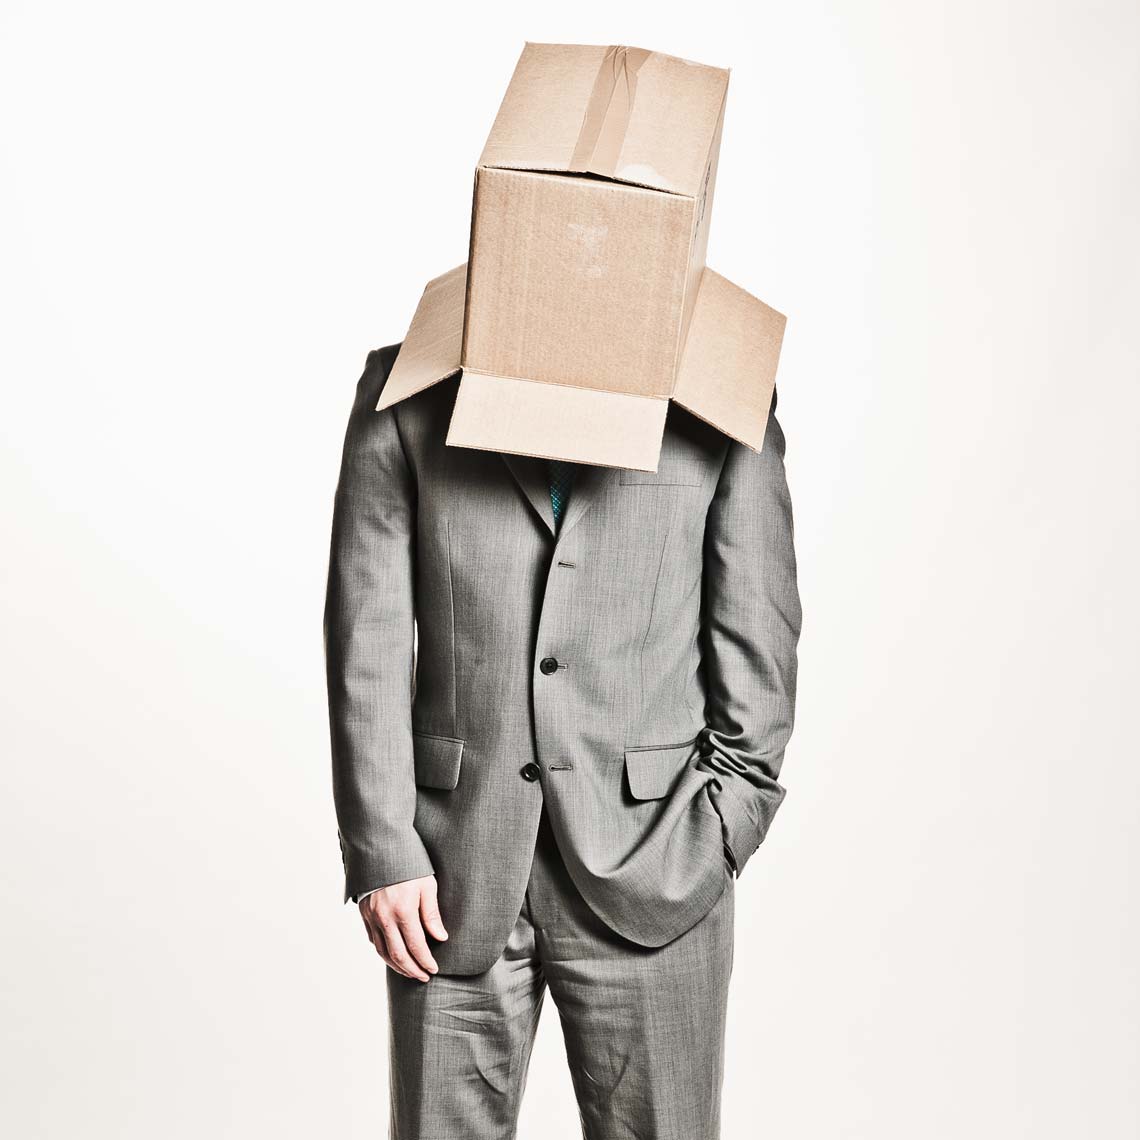 Businessman with box on his head